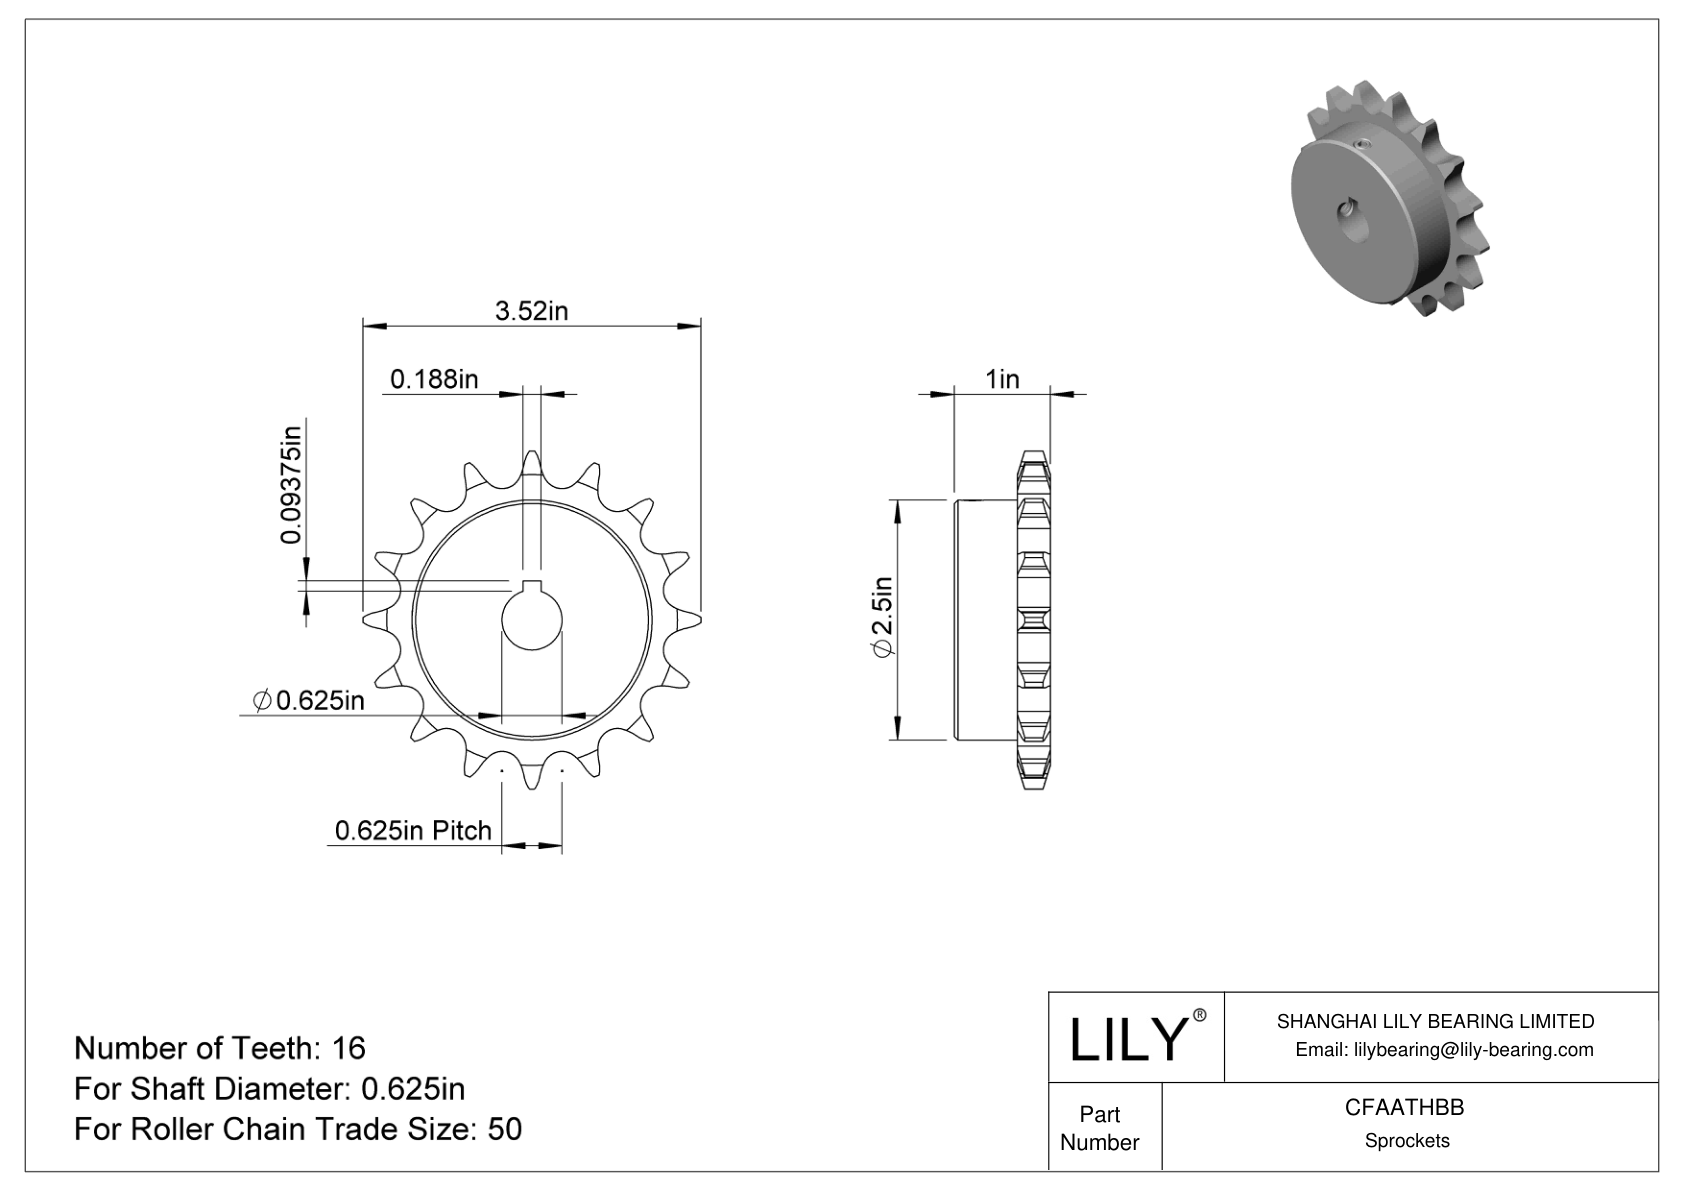 CFAATHBB Wear-Resistant Sprockets for ANSI Roller Chain cad drawing